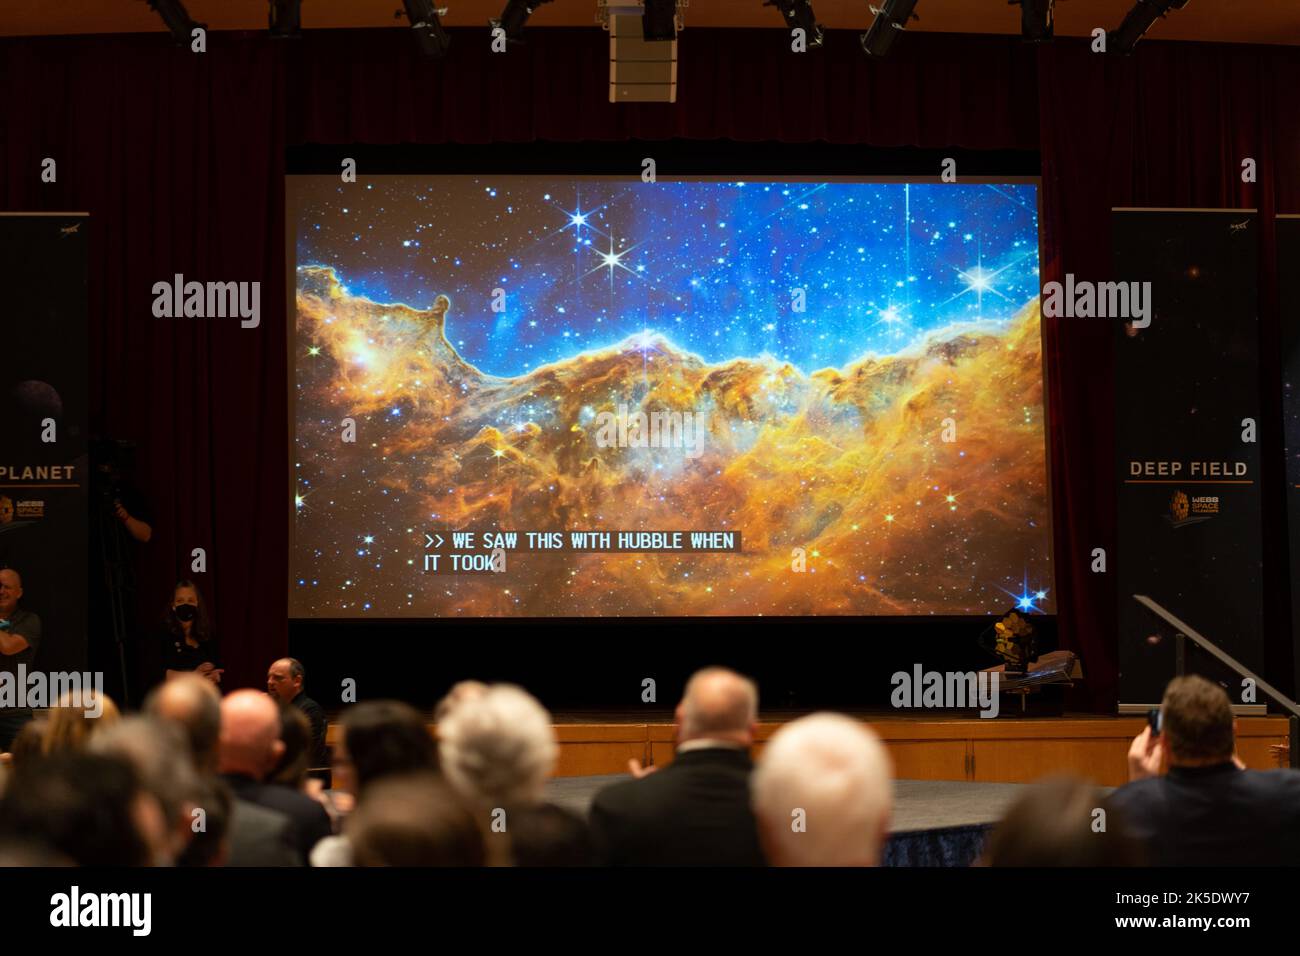 The image captured by NASA’s James Webb Space Telescope of the star-forming region called NGC 3324 in the Carina Nebula is seen on a screen as members of the media and guests watch the broadcast releasing the first full-color images from NASA’s James Webb Space Telescope, Tuesday, July 12, 2022, at NASA’s Goddard Space Flight Center in Greenbelt, Md.  The first full-color images and spectroscopic data from the James Webb Space Telescope, a partnership with ESA (European Space Agency) and the Canadian Space Agency (CSA), are a demonstration of the power of Webb as the telescope begins its scien Stock Photo